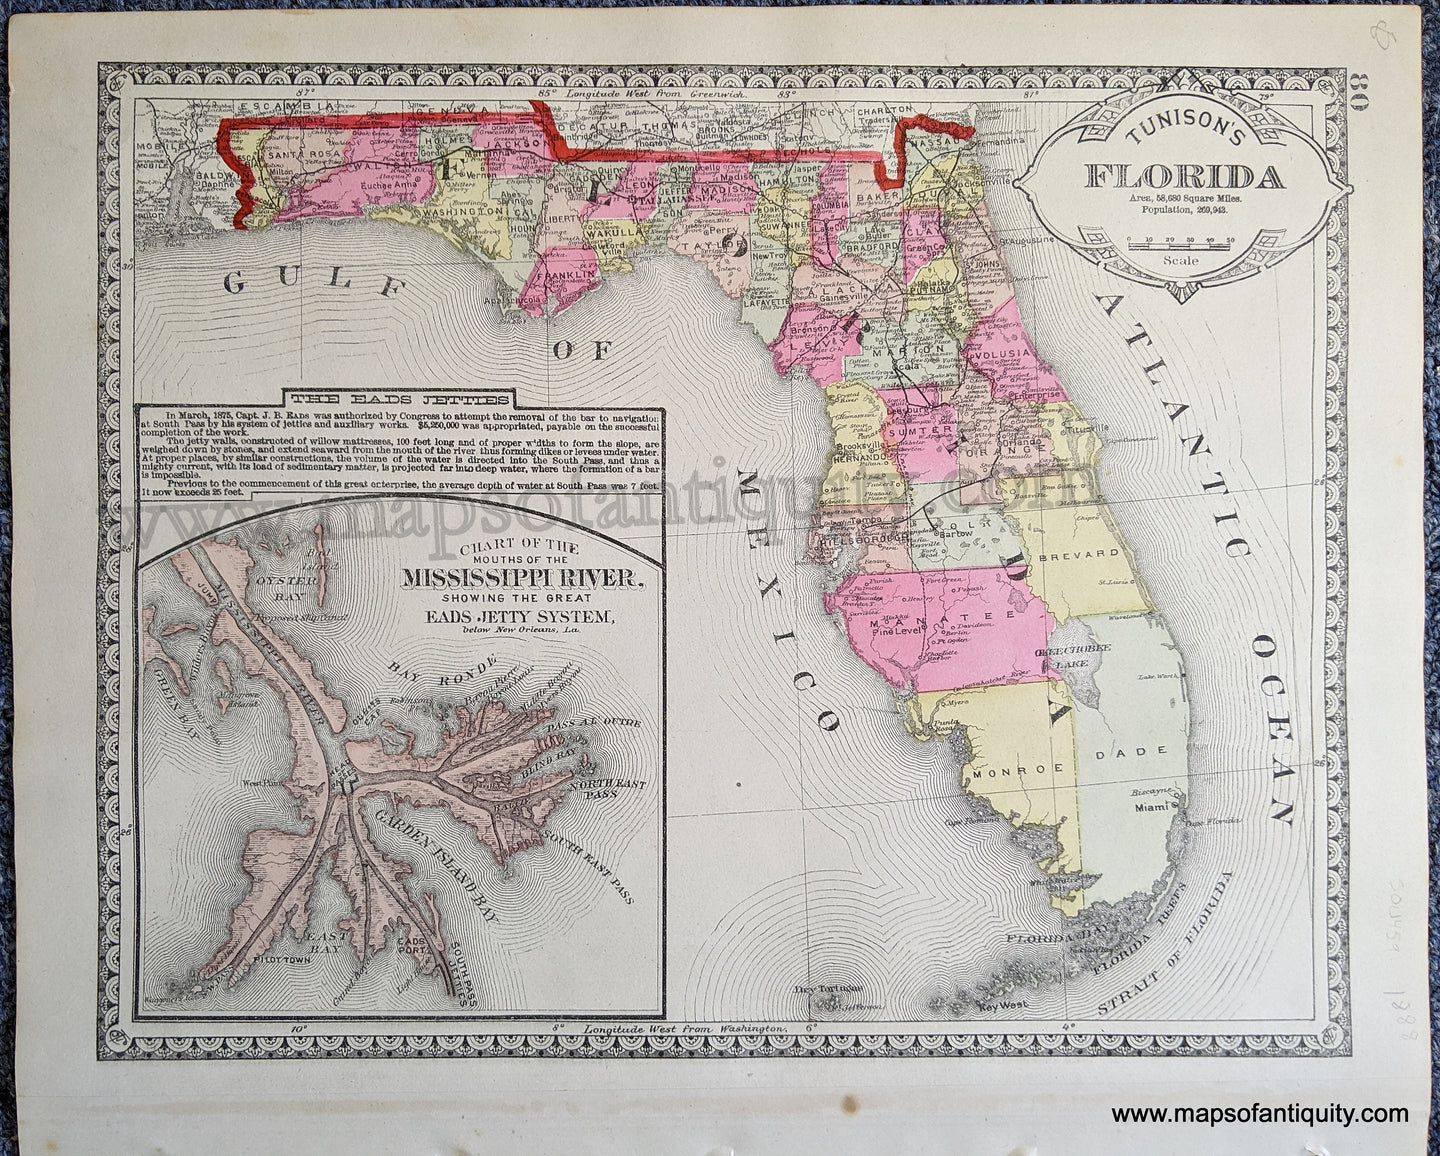 Antique-Map-Double-sided-sheet-with-multiple-maps:-Centerfold---Tunison's-Arkansas-Louisiana-and-Mississippi;-versos:-Tunison's-Georgia-and-South-Carolina-/-Tunison's-Florida-United-States-South-1888-Tunison-Maps-Of-Antiquity-1800s-19th-century